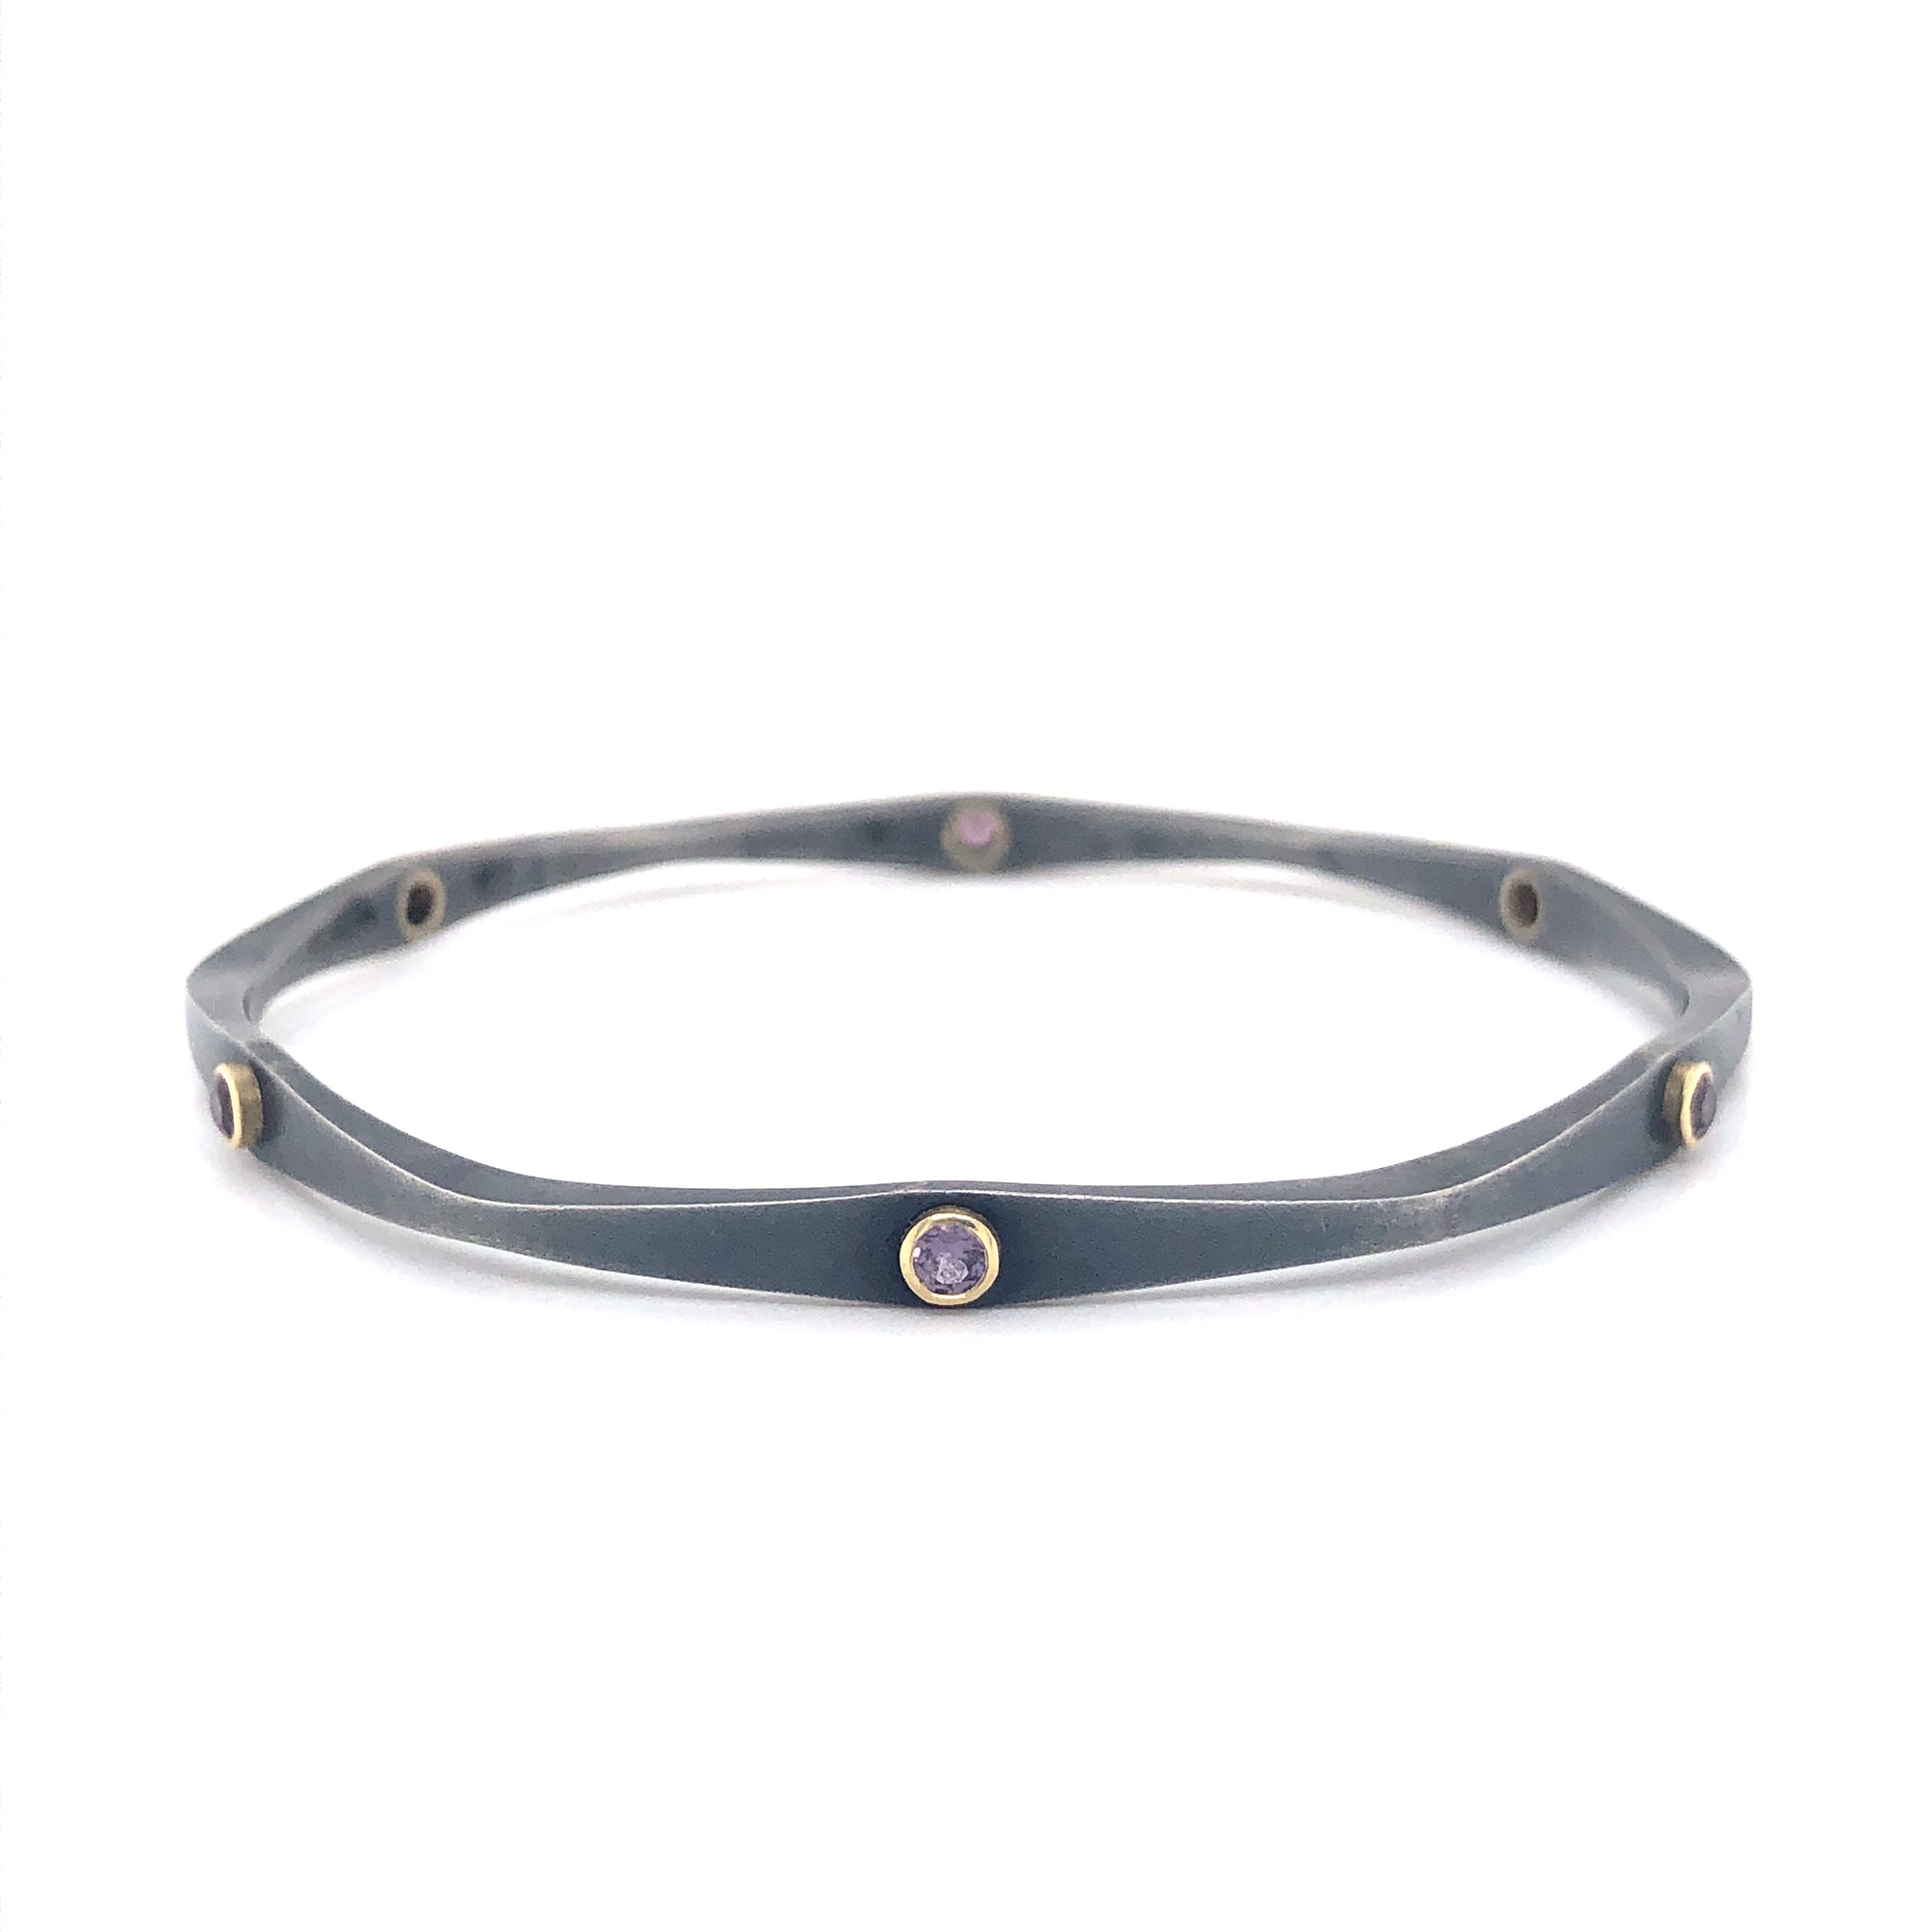 Wave bangle with Purple Spinel